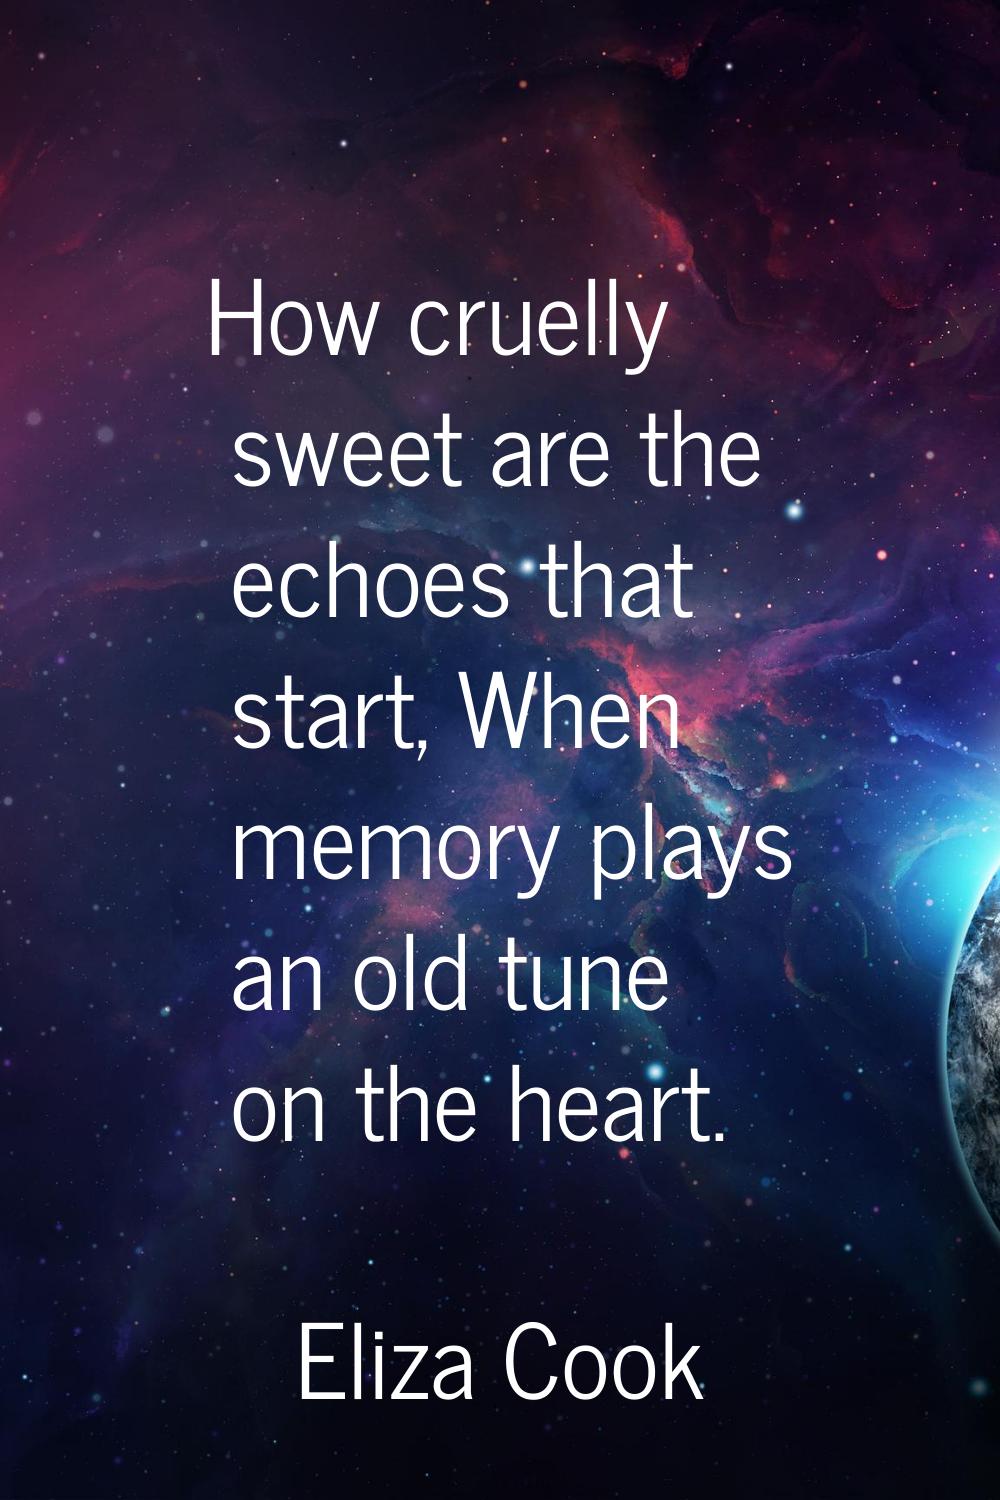 How cruelly sweet are the echoes that start, When memory plays an old tune on the heart.